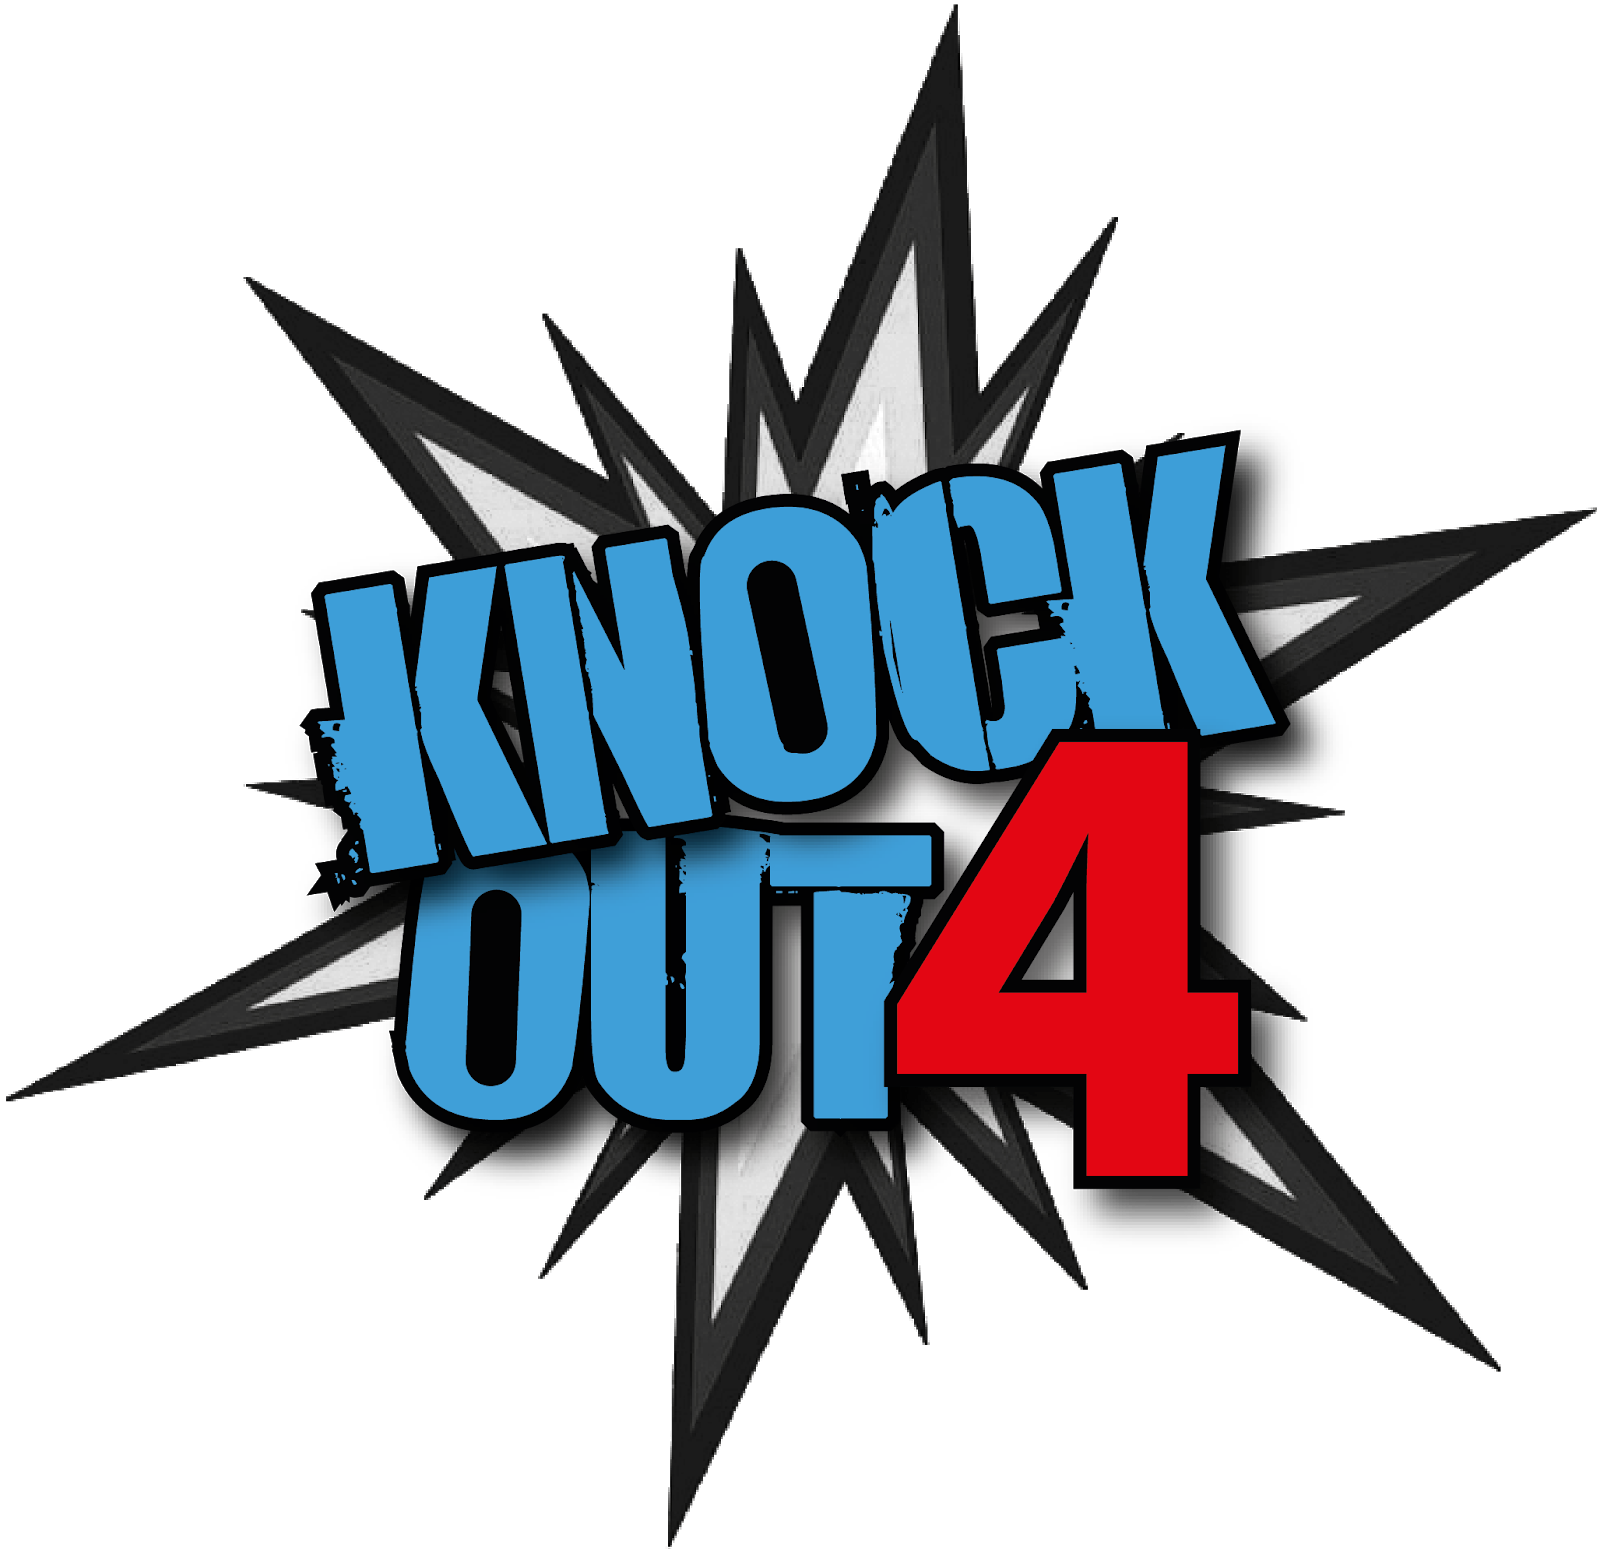 Knock Out 4